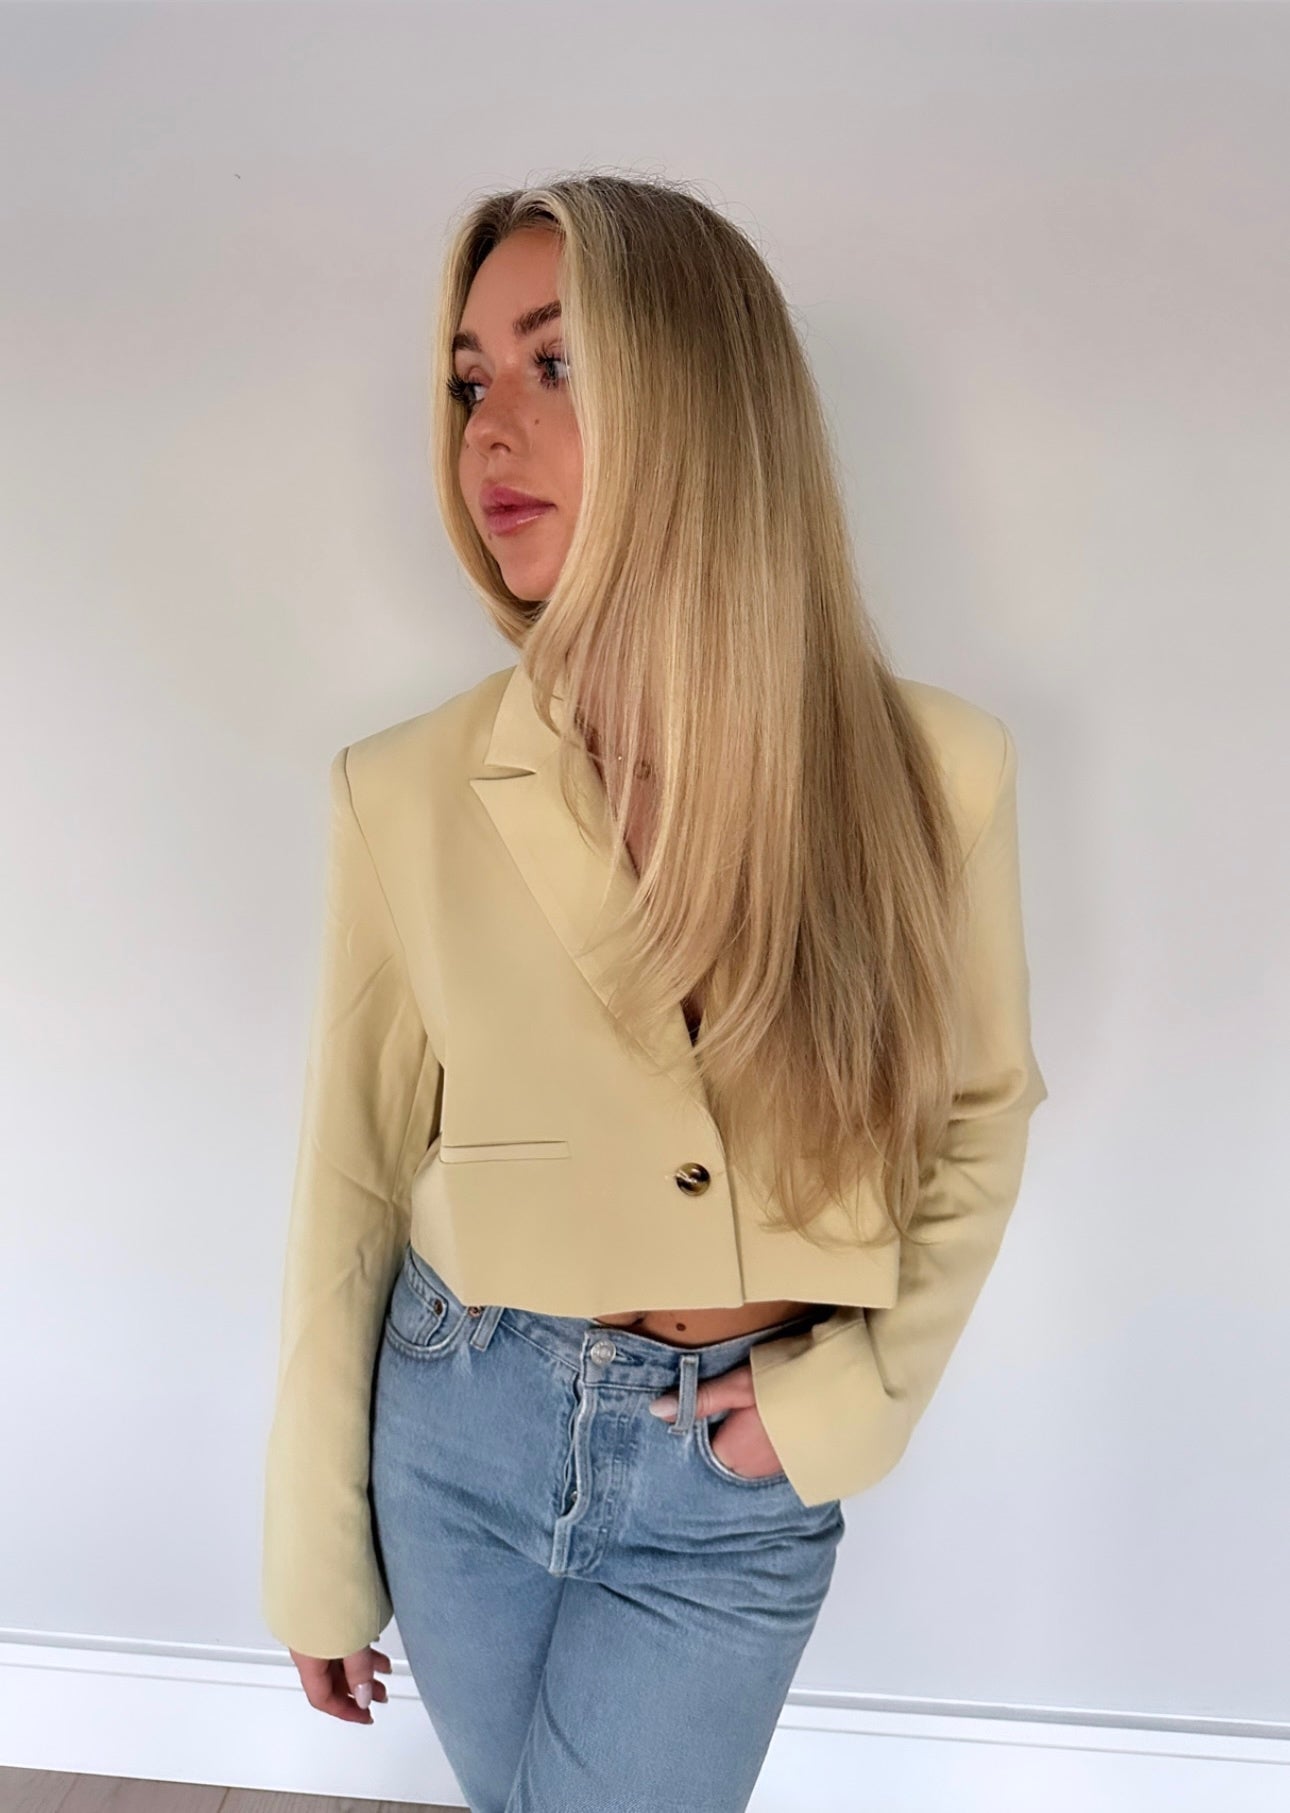 Cream/butter cropped blazer, oversized fit